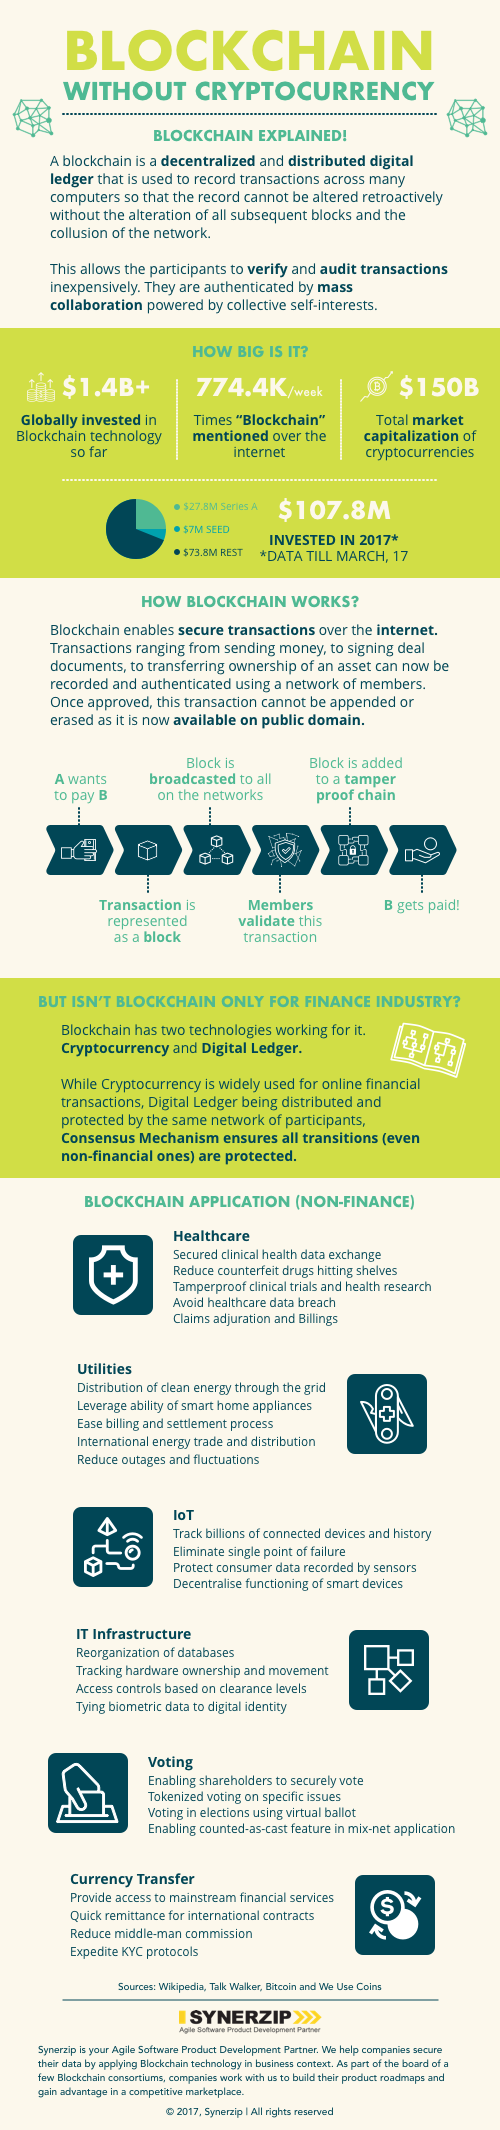 Blockchain Without Cryptocurrency